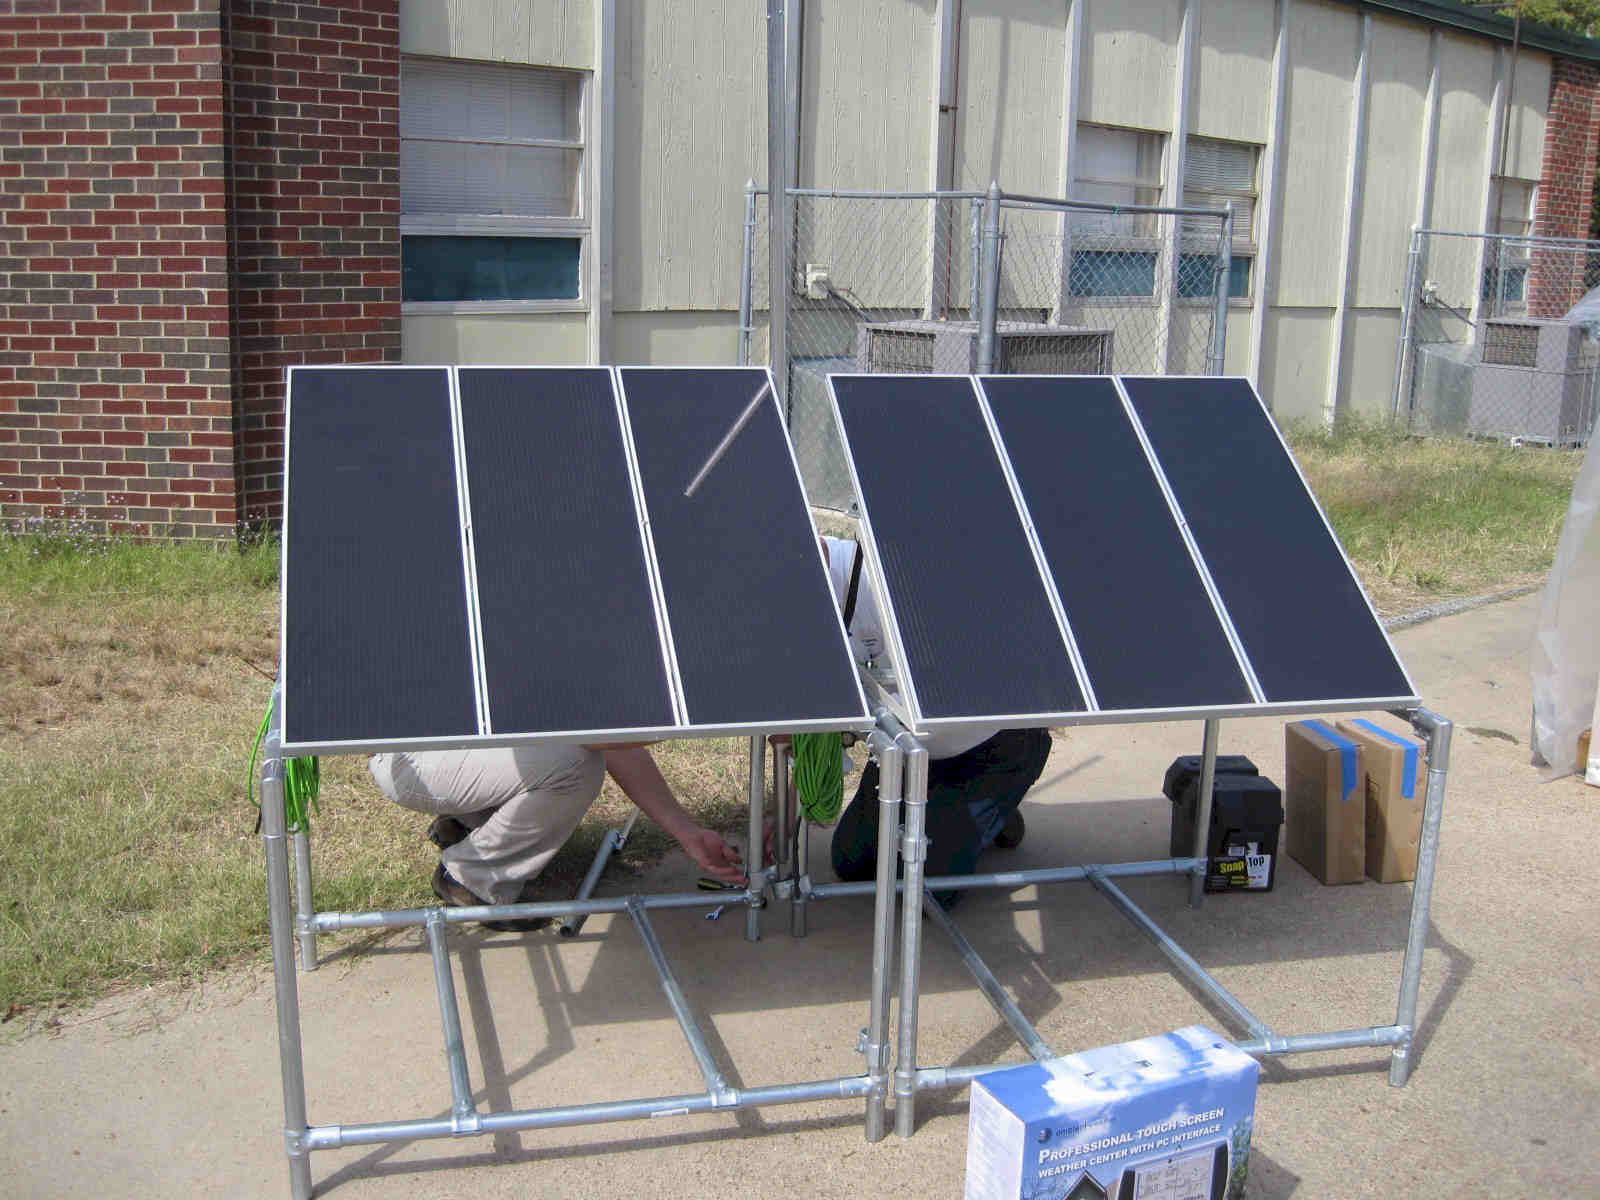 Delivering and setting up the solar panel array.